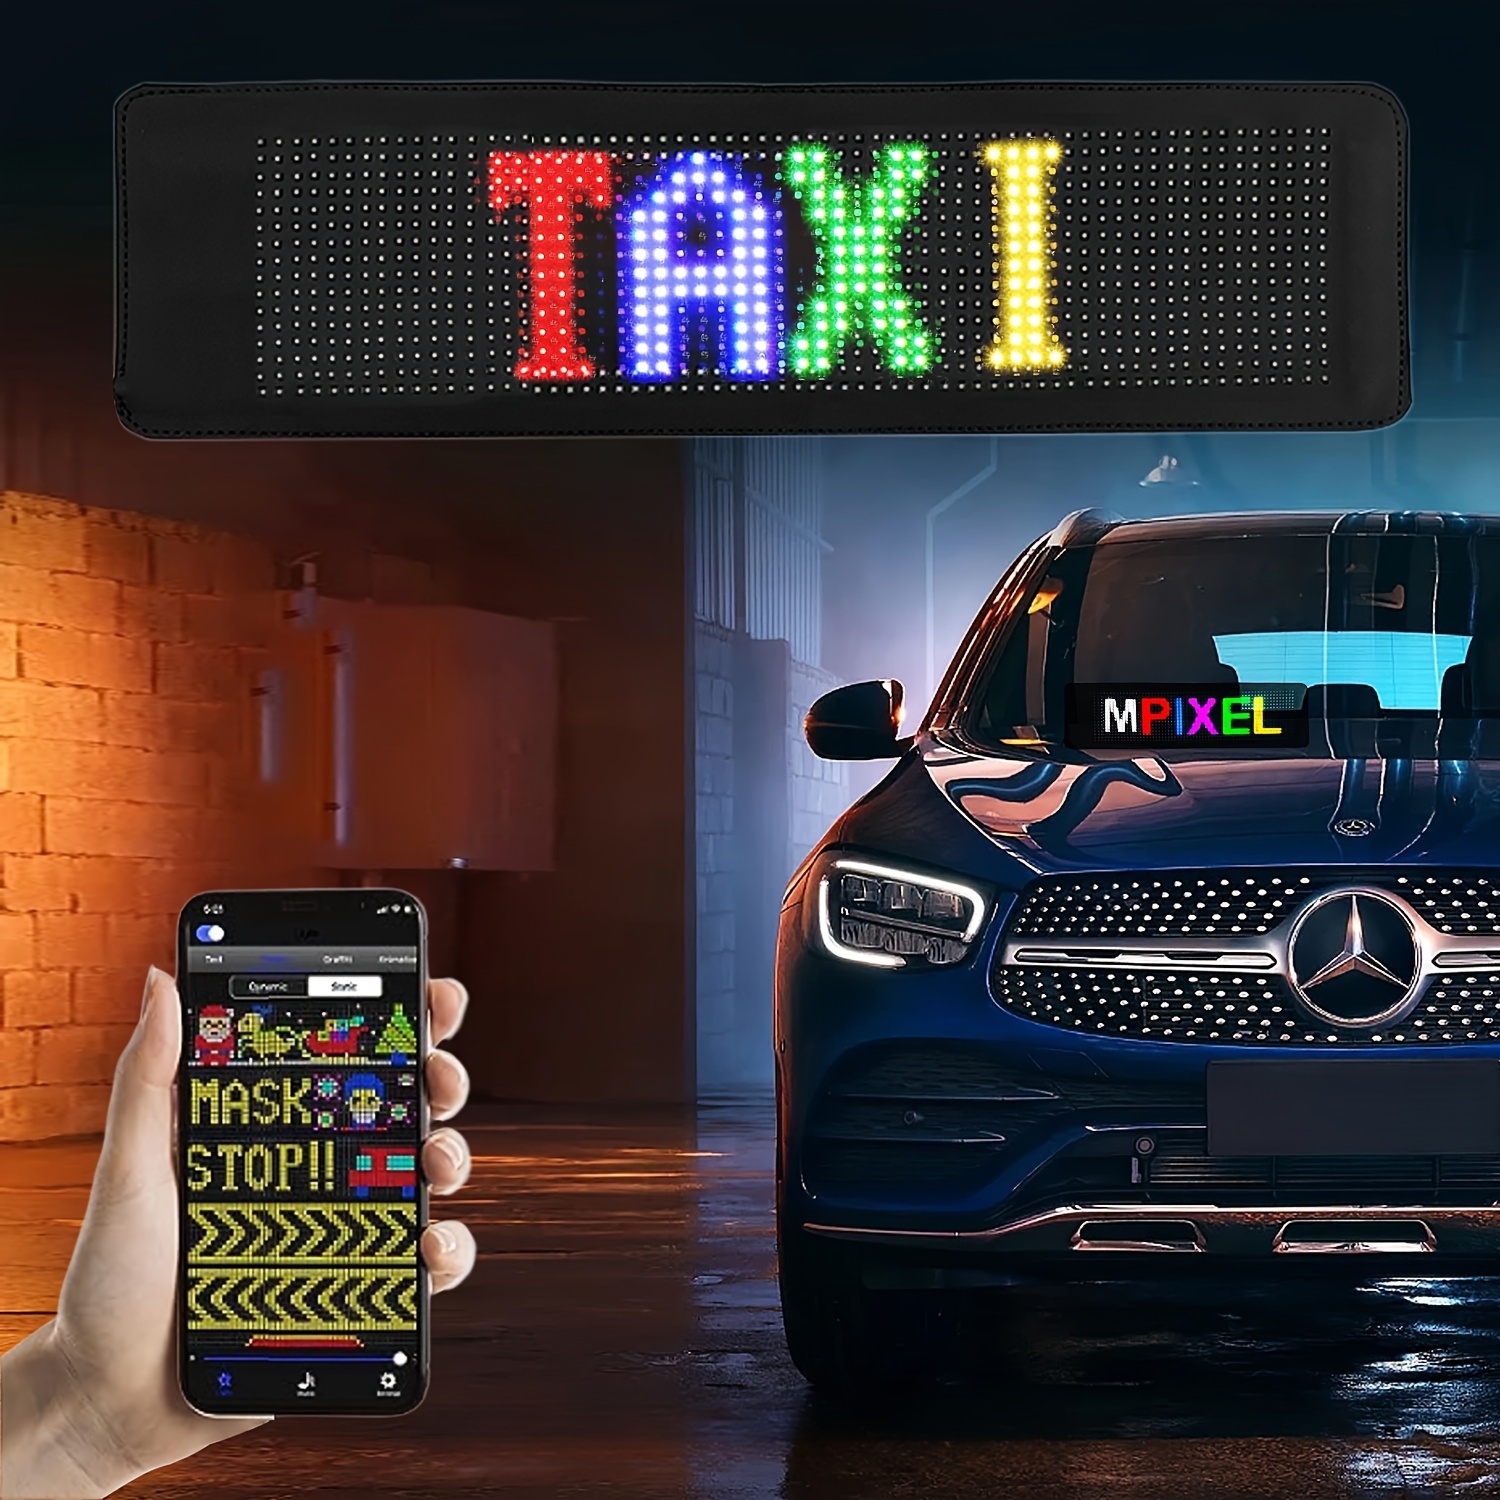 Tunemax - Customizable Tunemax Led Display,Tunemax Custom Text Electric  Sticker,Tunemax Led Display,Tunemax Scrolling Bright Advertising Led Signs,Tunemax  Led Display Bluetooth App Control: Buy Online at Best Price in UAE 